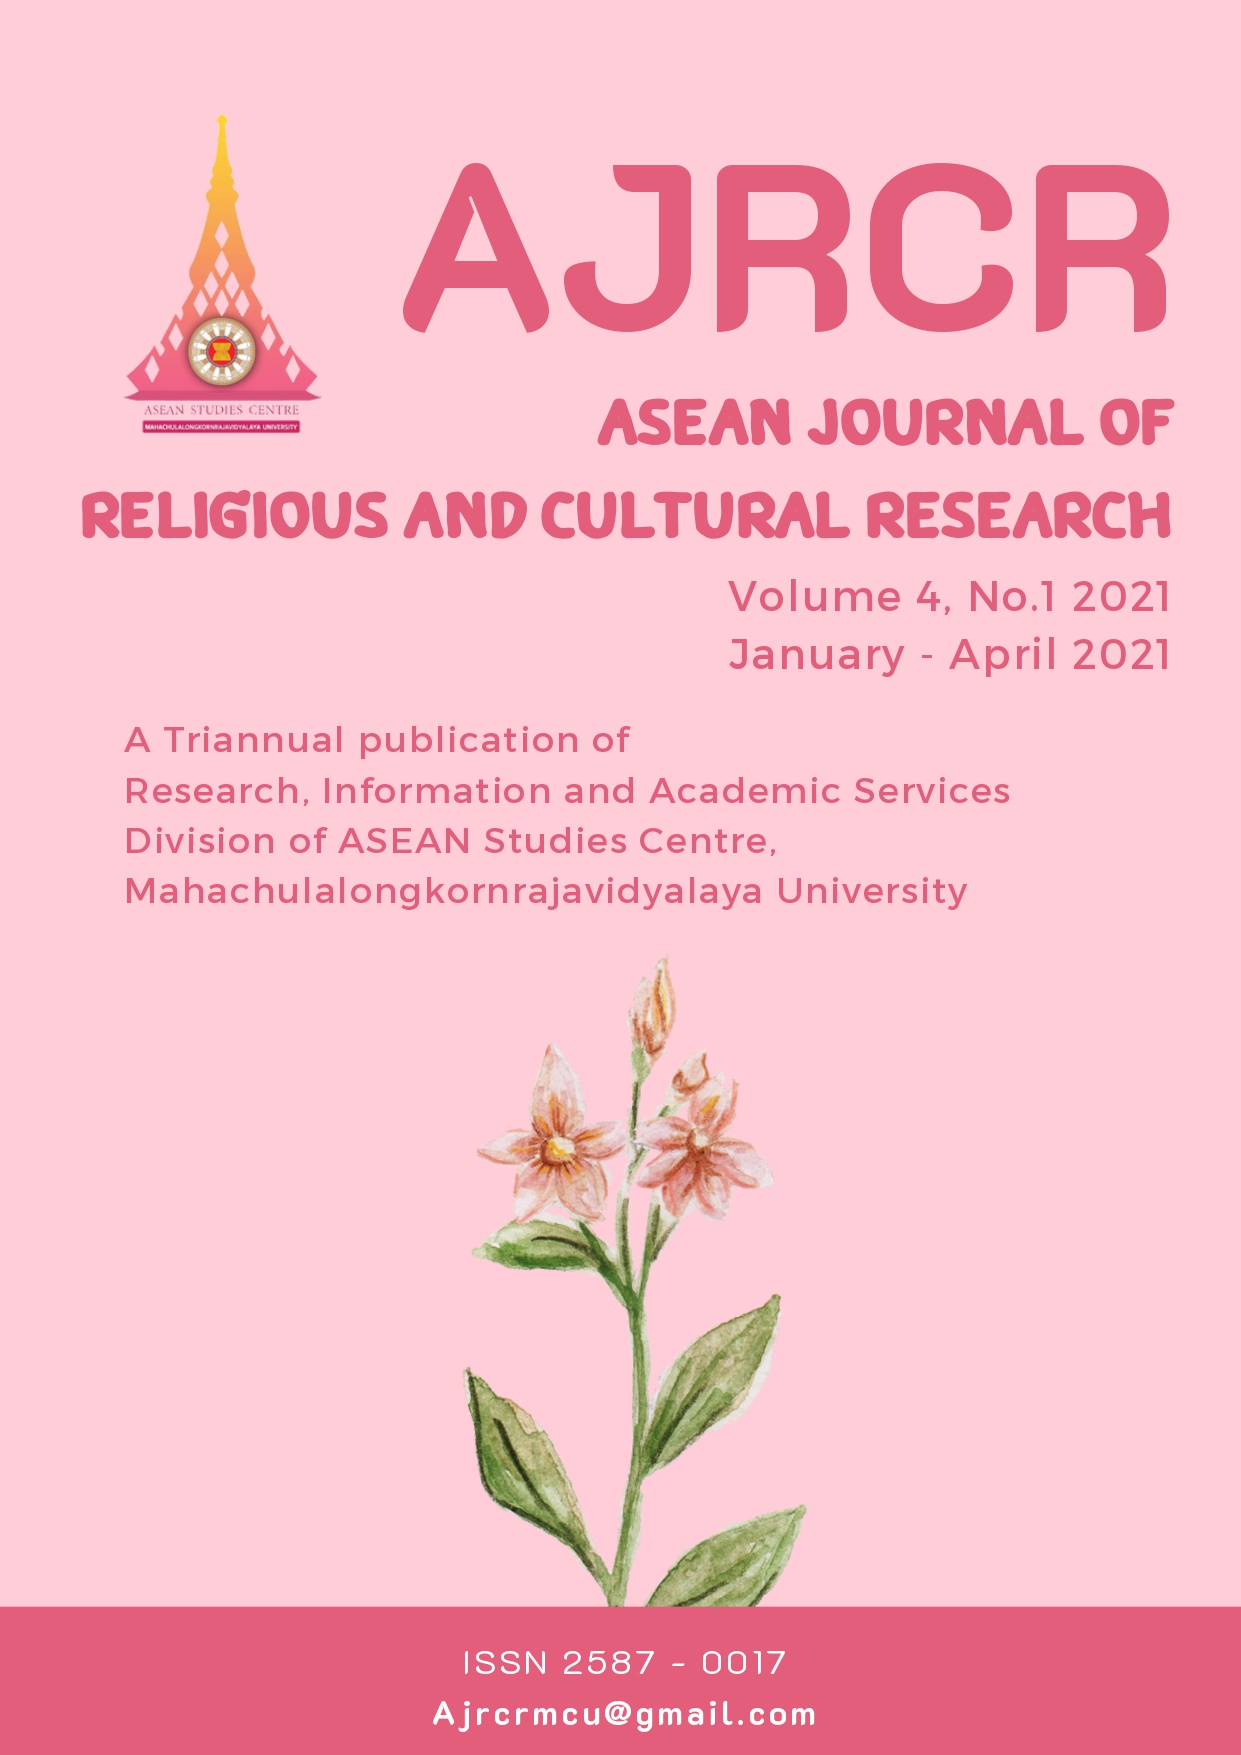 					View Vol. 4 No. 1 (2021): ASEAN Journal of Religious and Cultural Research (AJRCR)
				